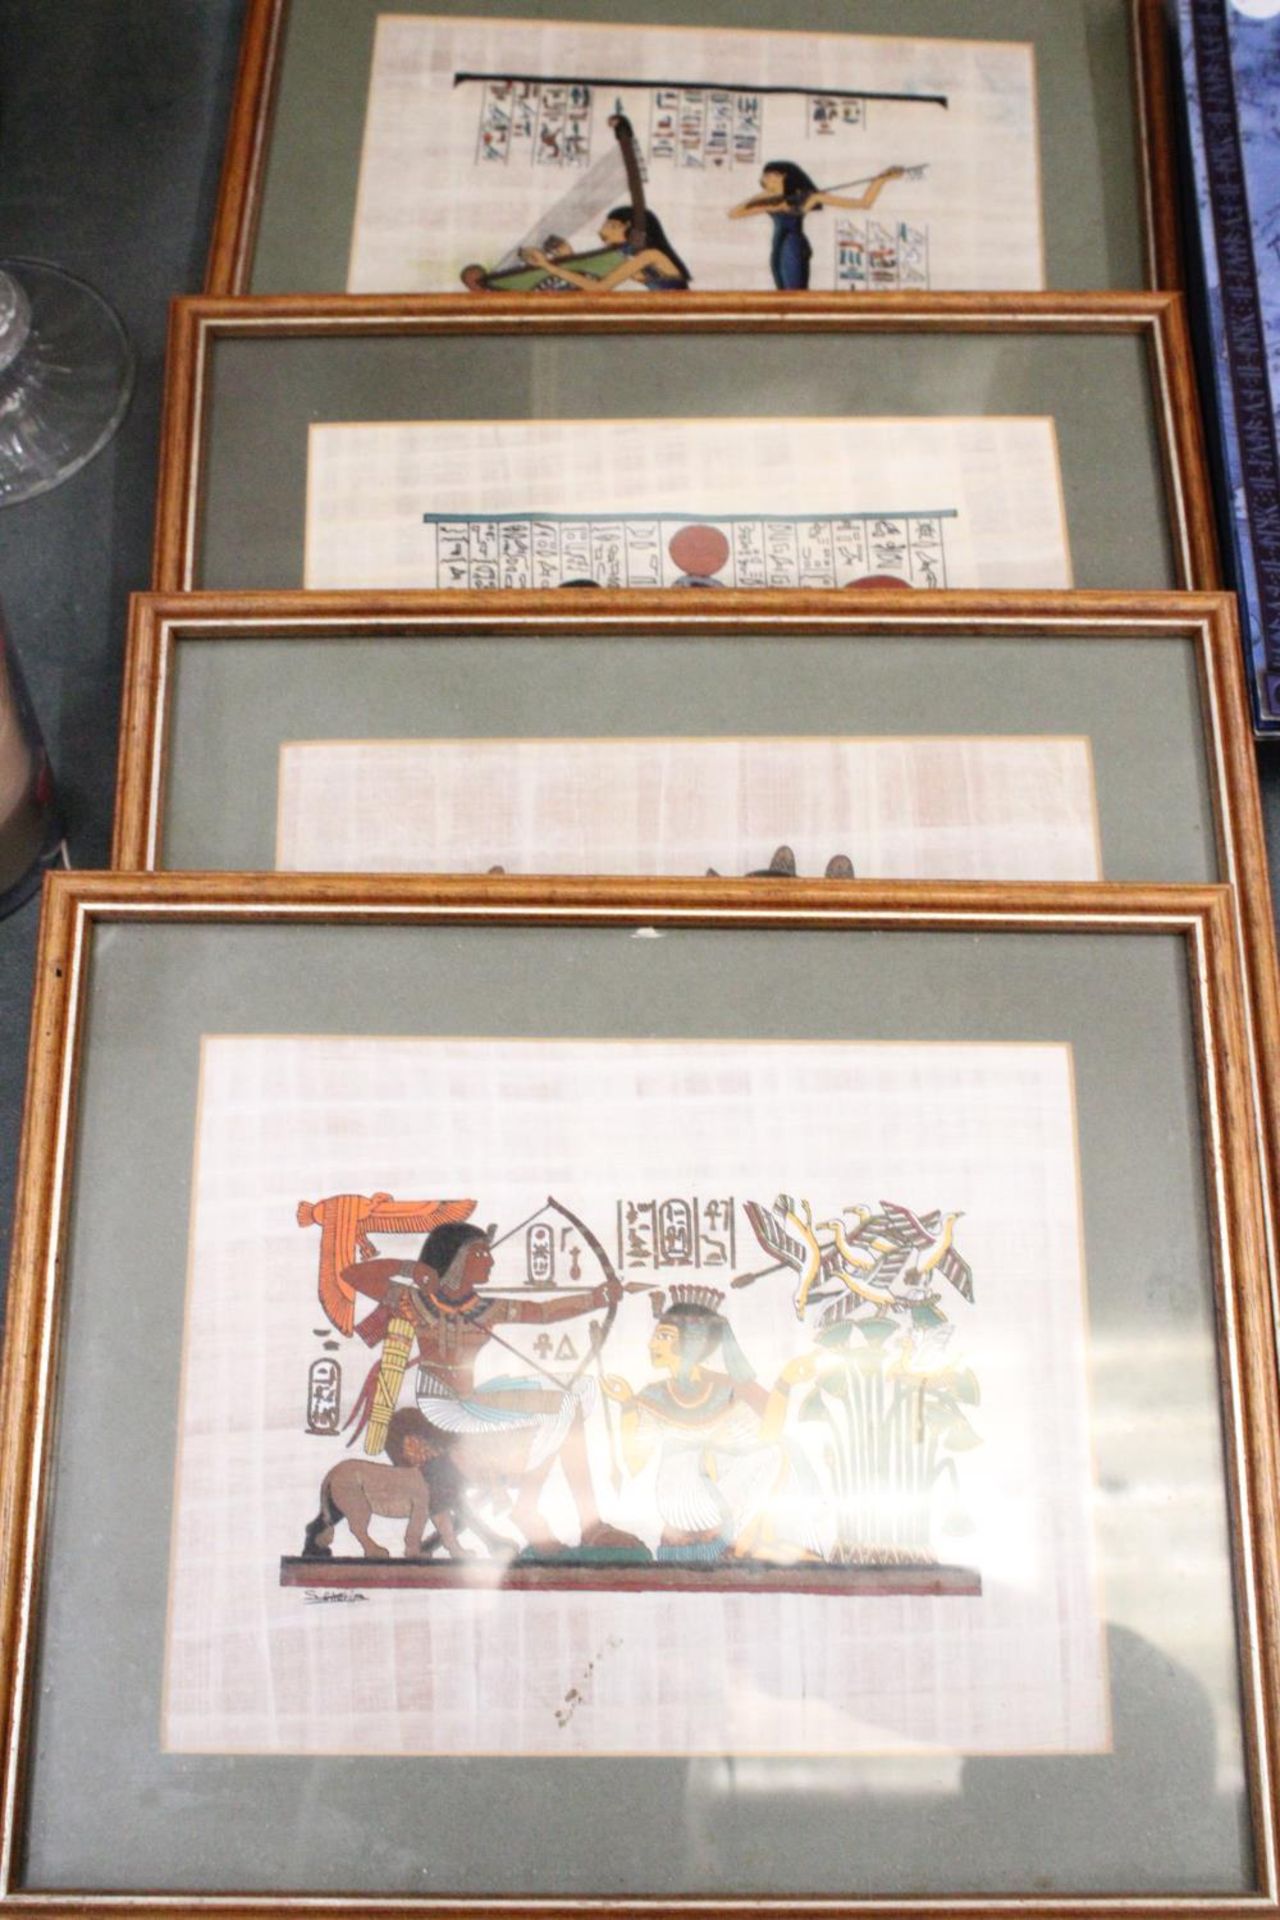 FOUR FRAMED ANCIENT EGYPTIAN DEPICTIONS ON COTTON